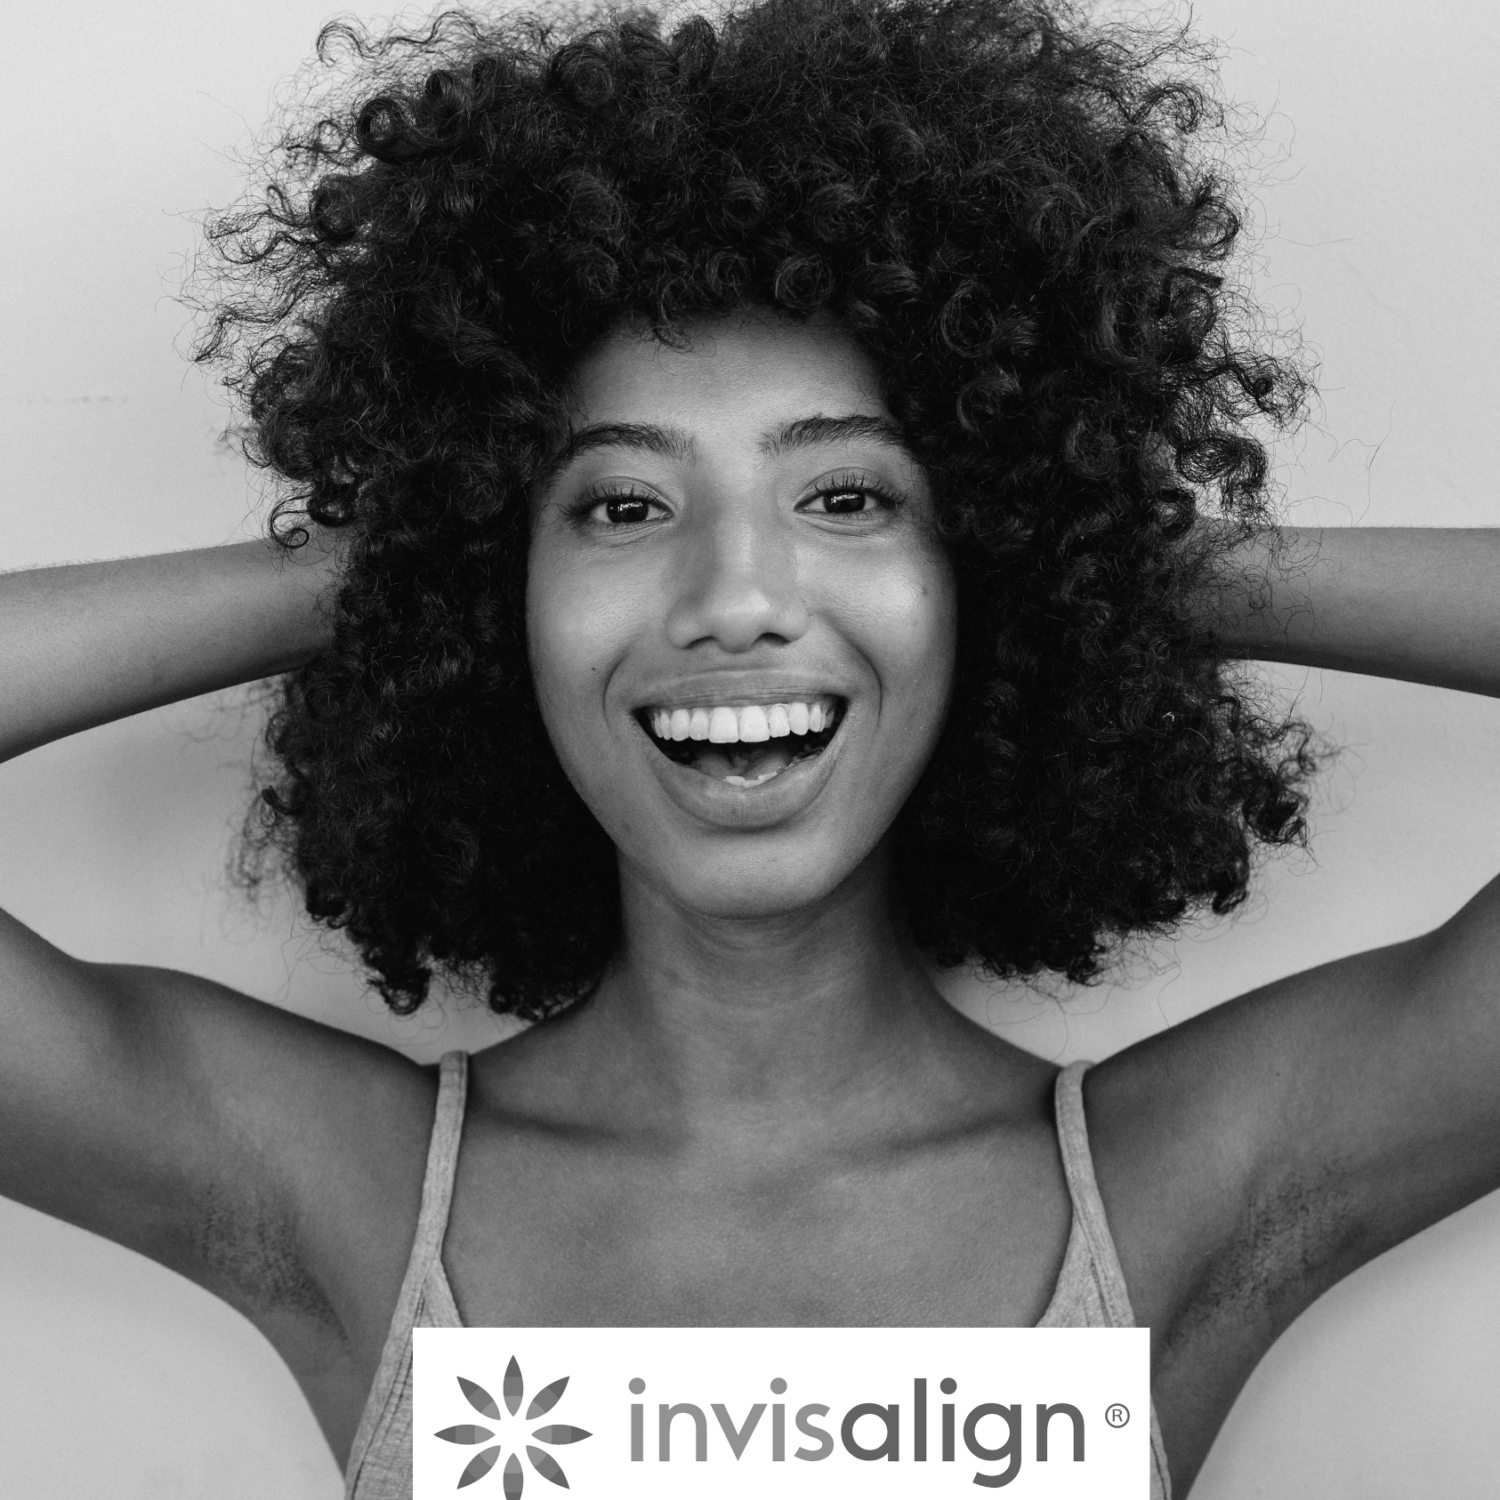 Invisalign - and what it can do for you